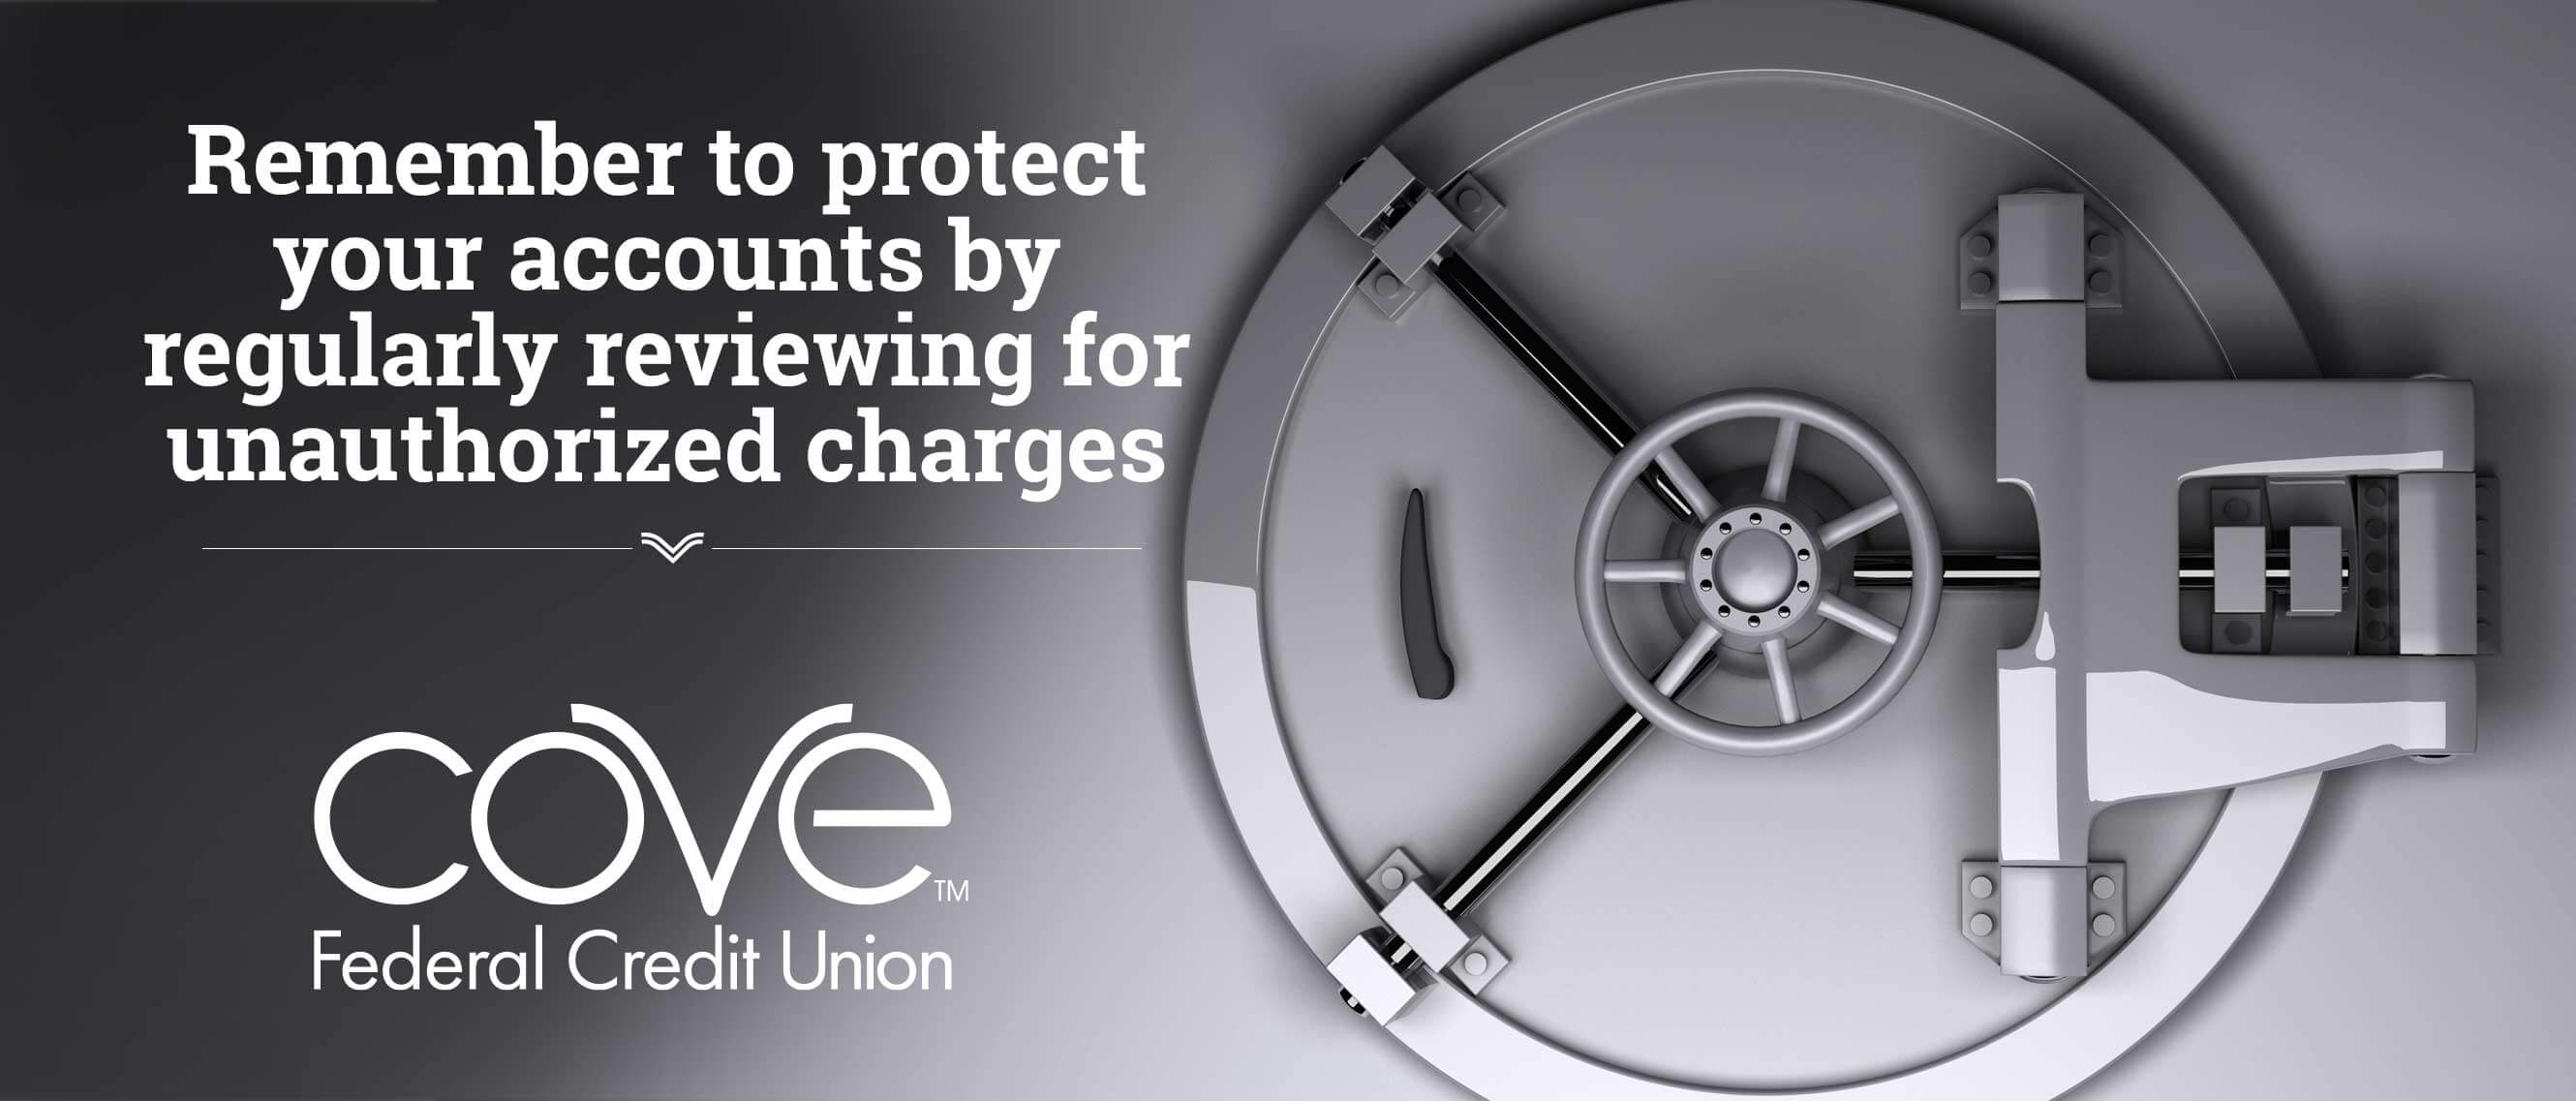 Remember to protect your accounts by regularly reviewing for unauthorized charges